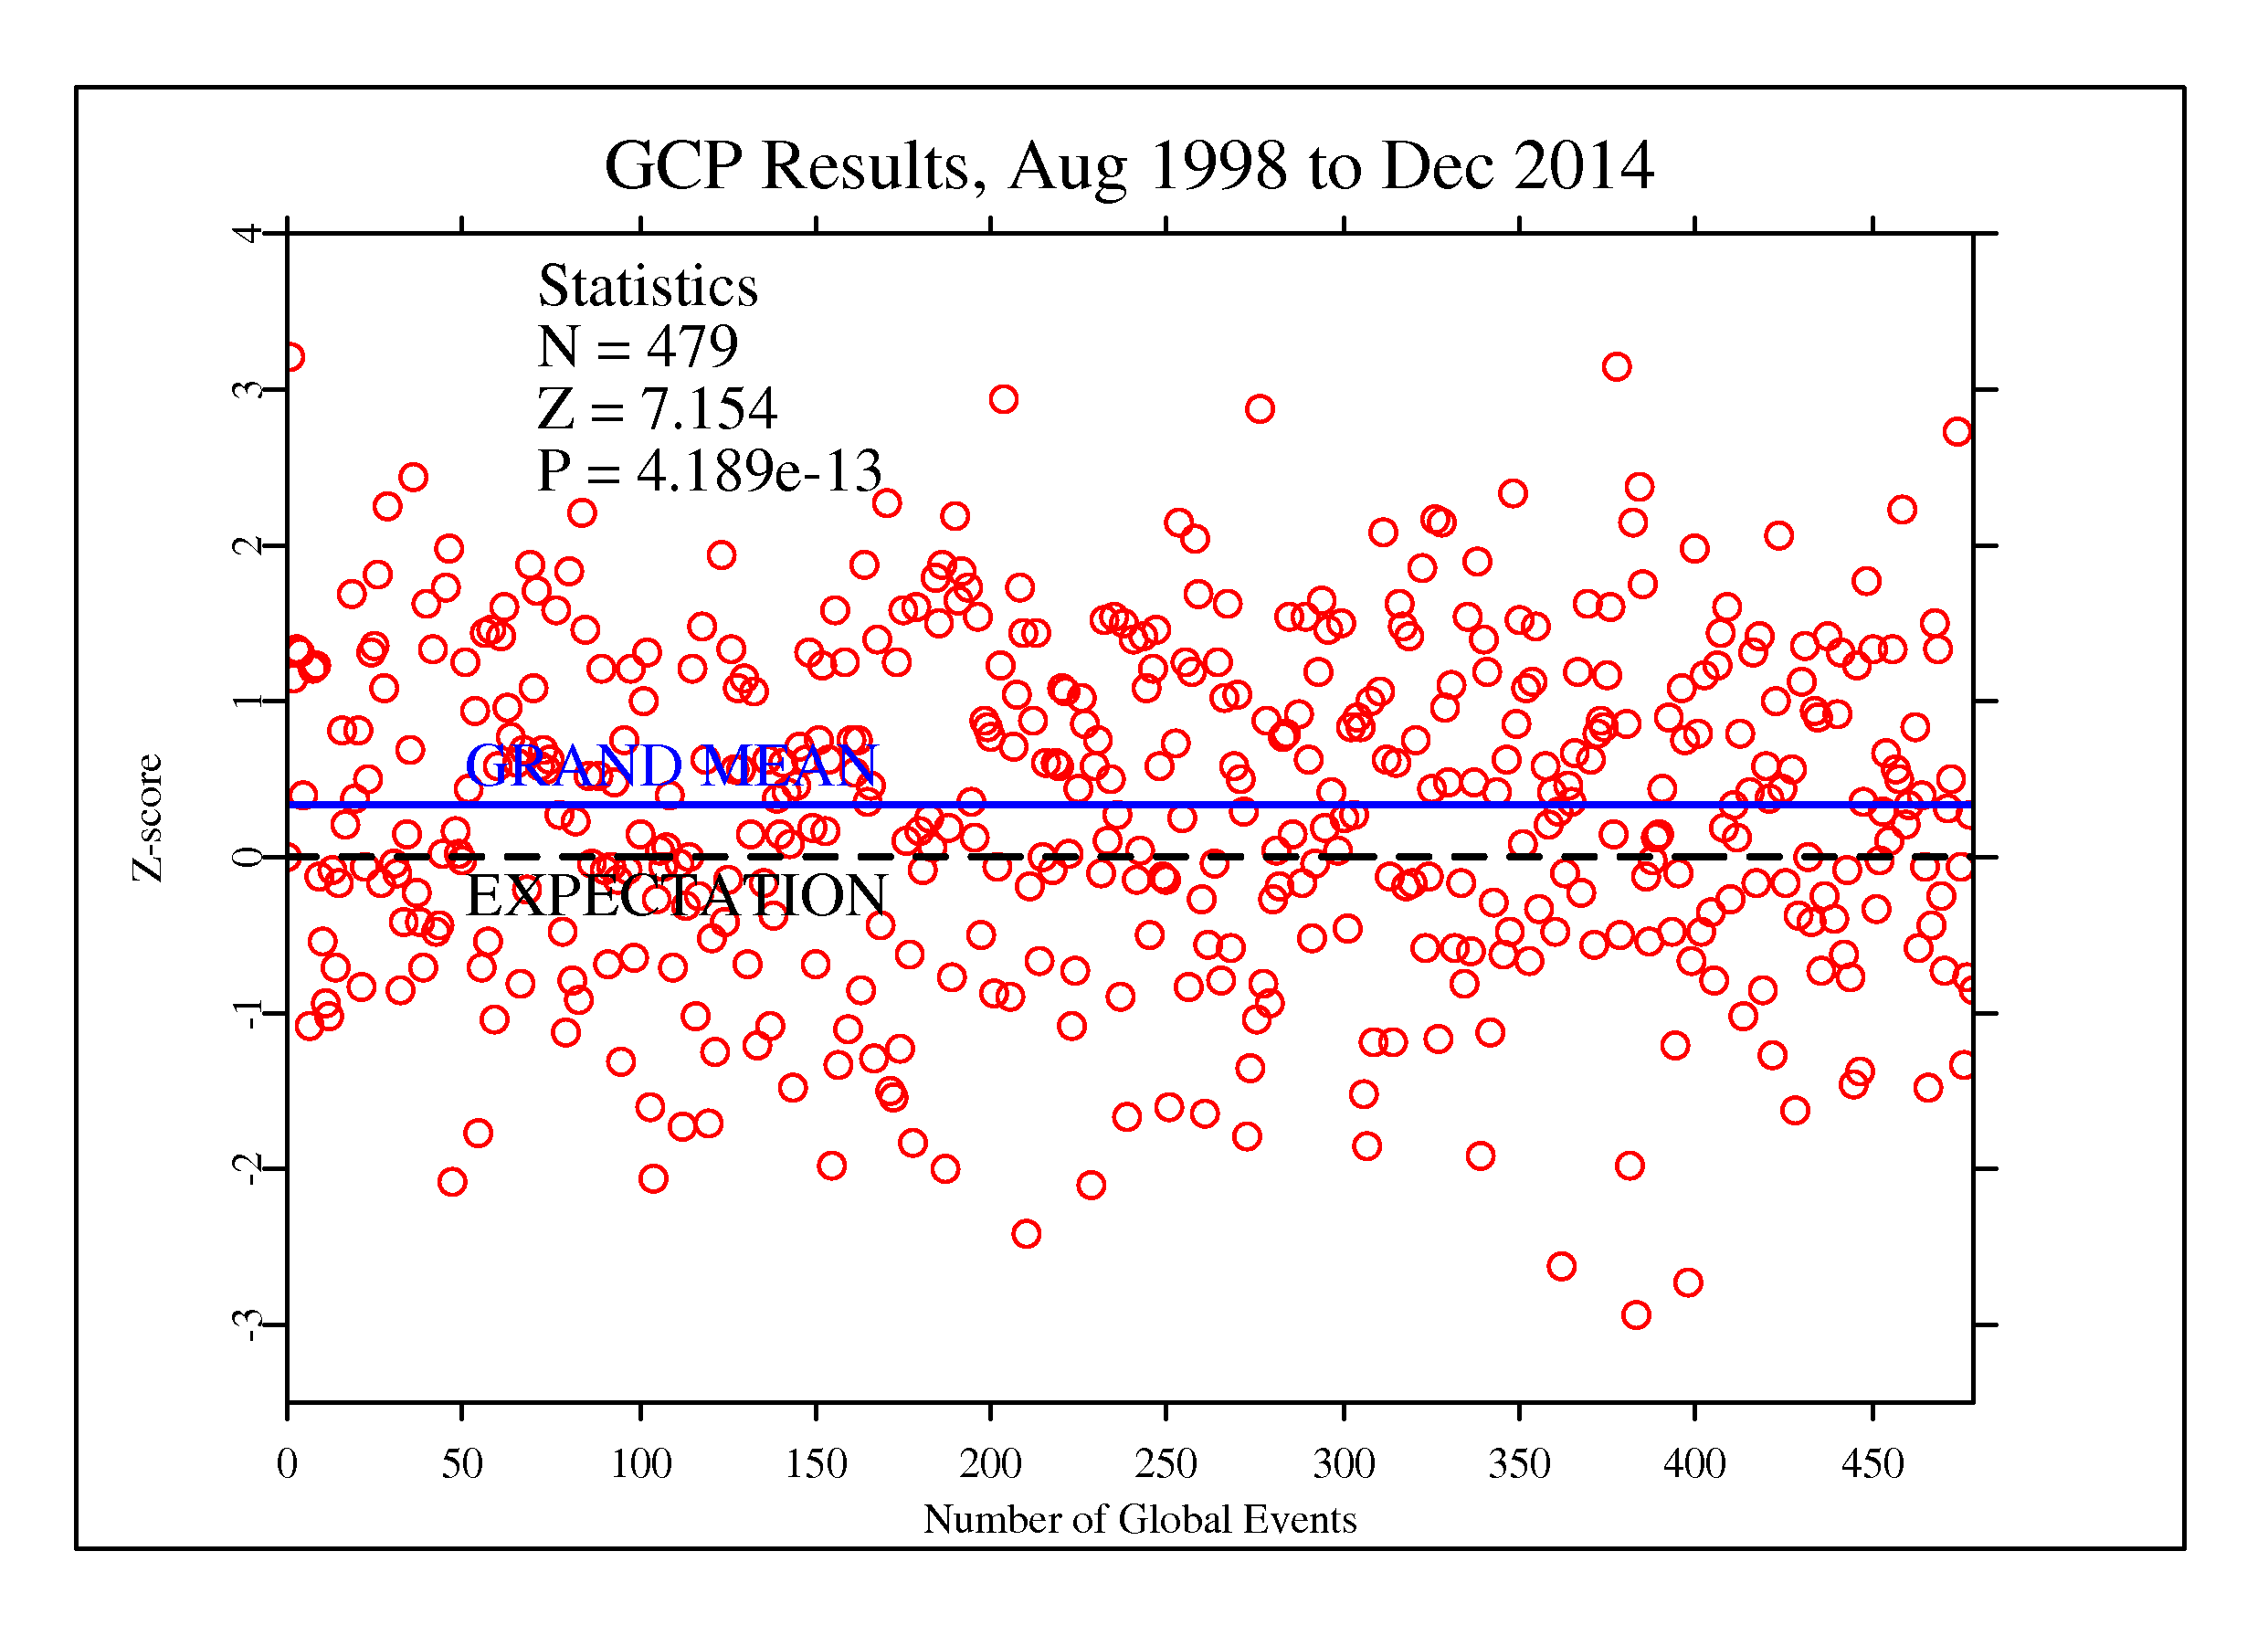 image: a graph of GCP results, Aug 1998 to Sept 2014